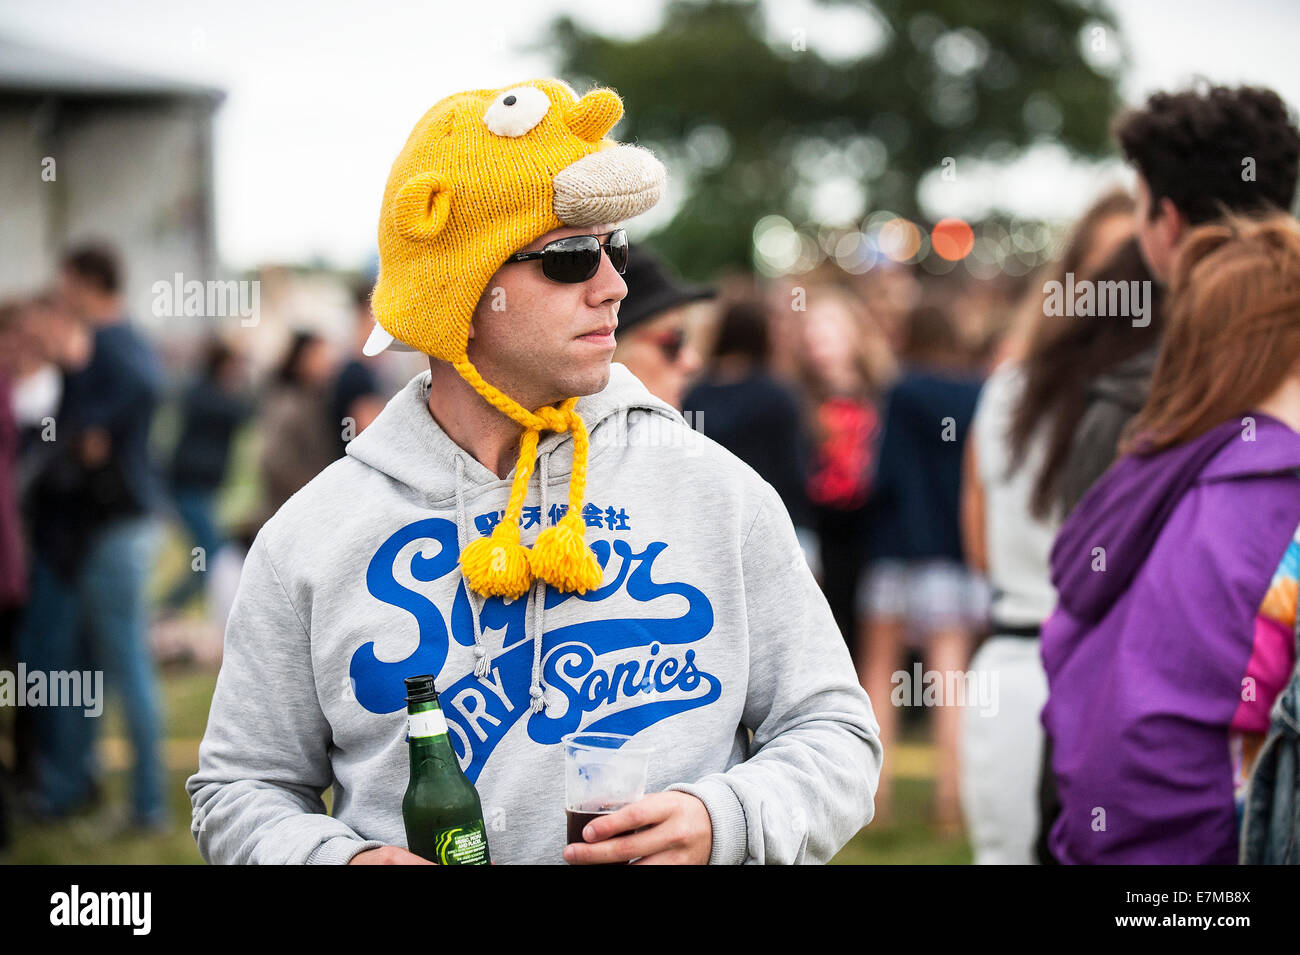 A festivalgoer wearing a silly hat at the Brentwood Festival. Stock Photo